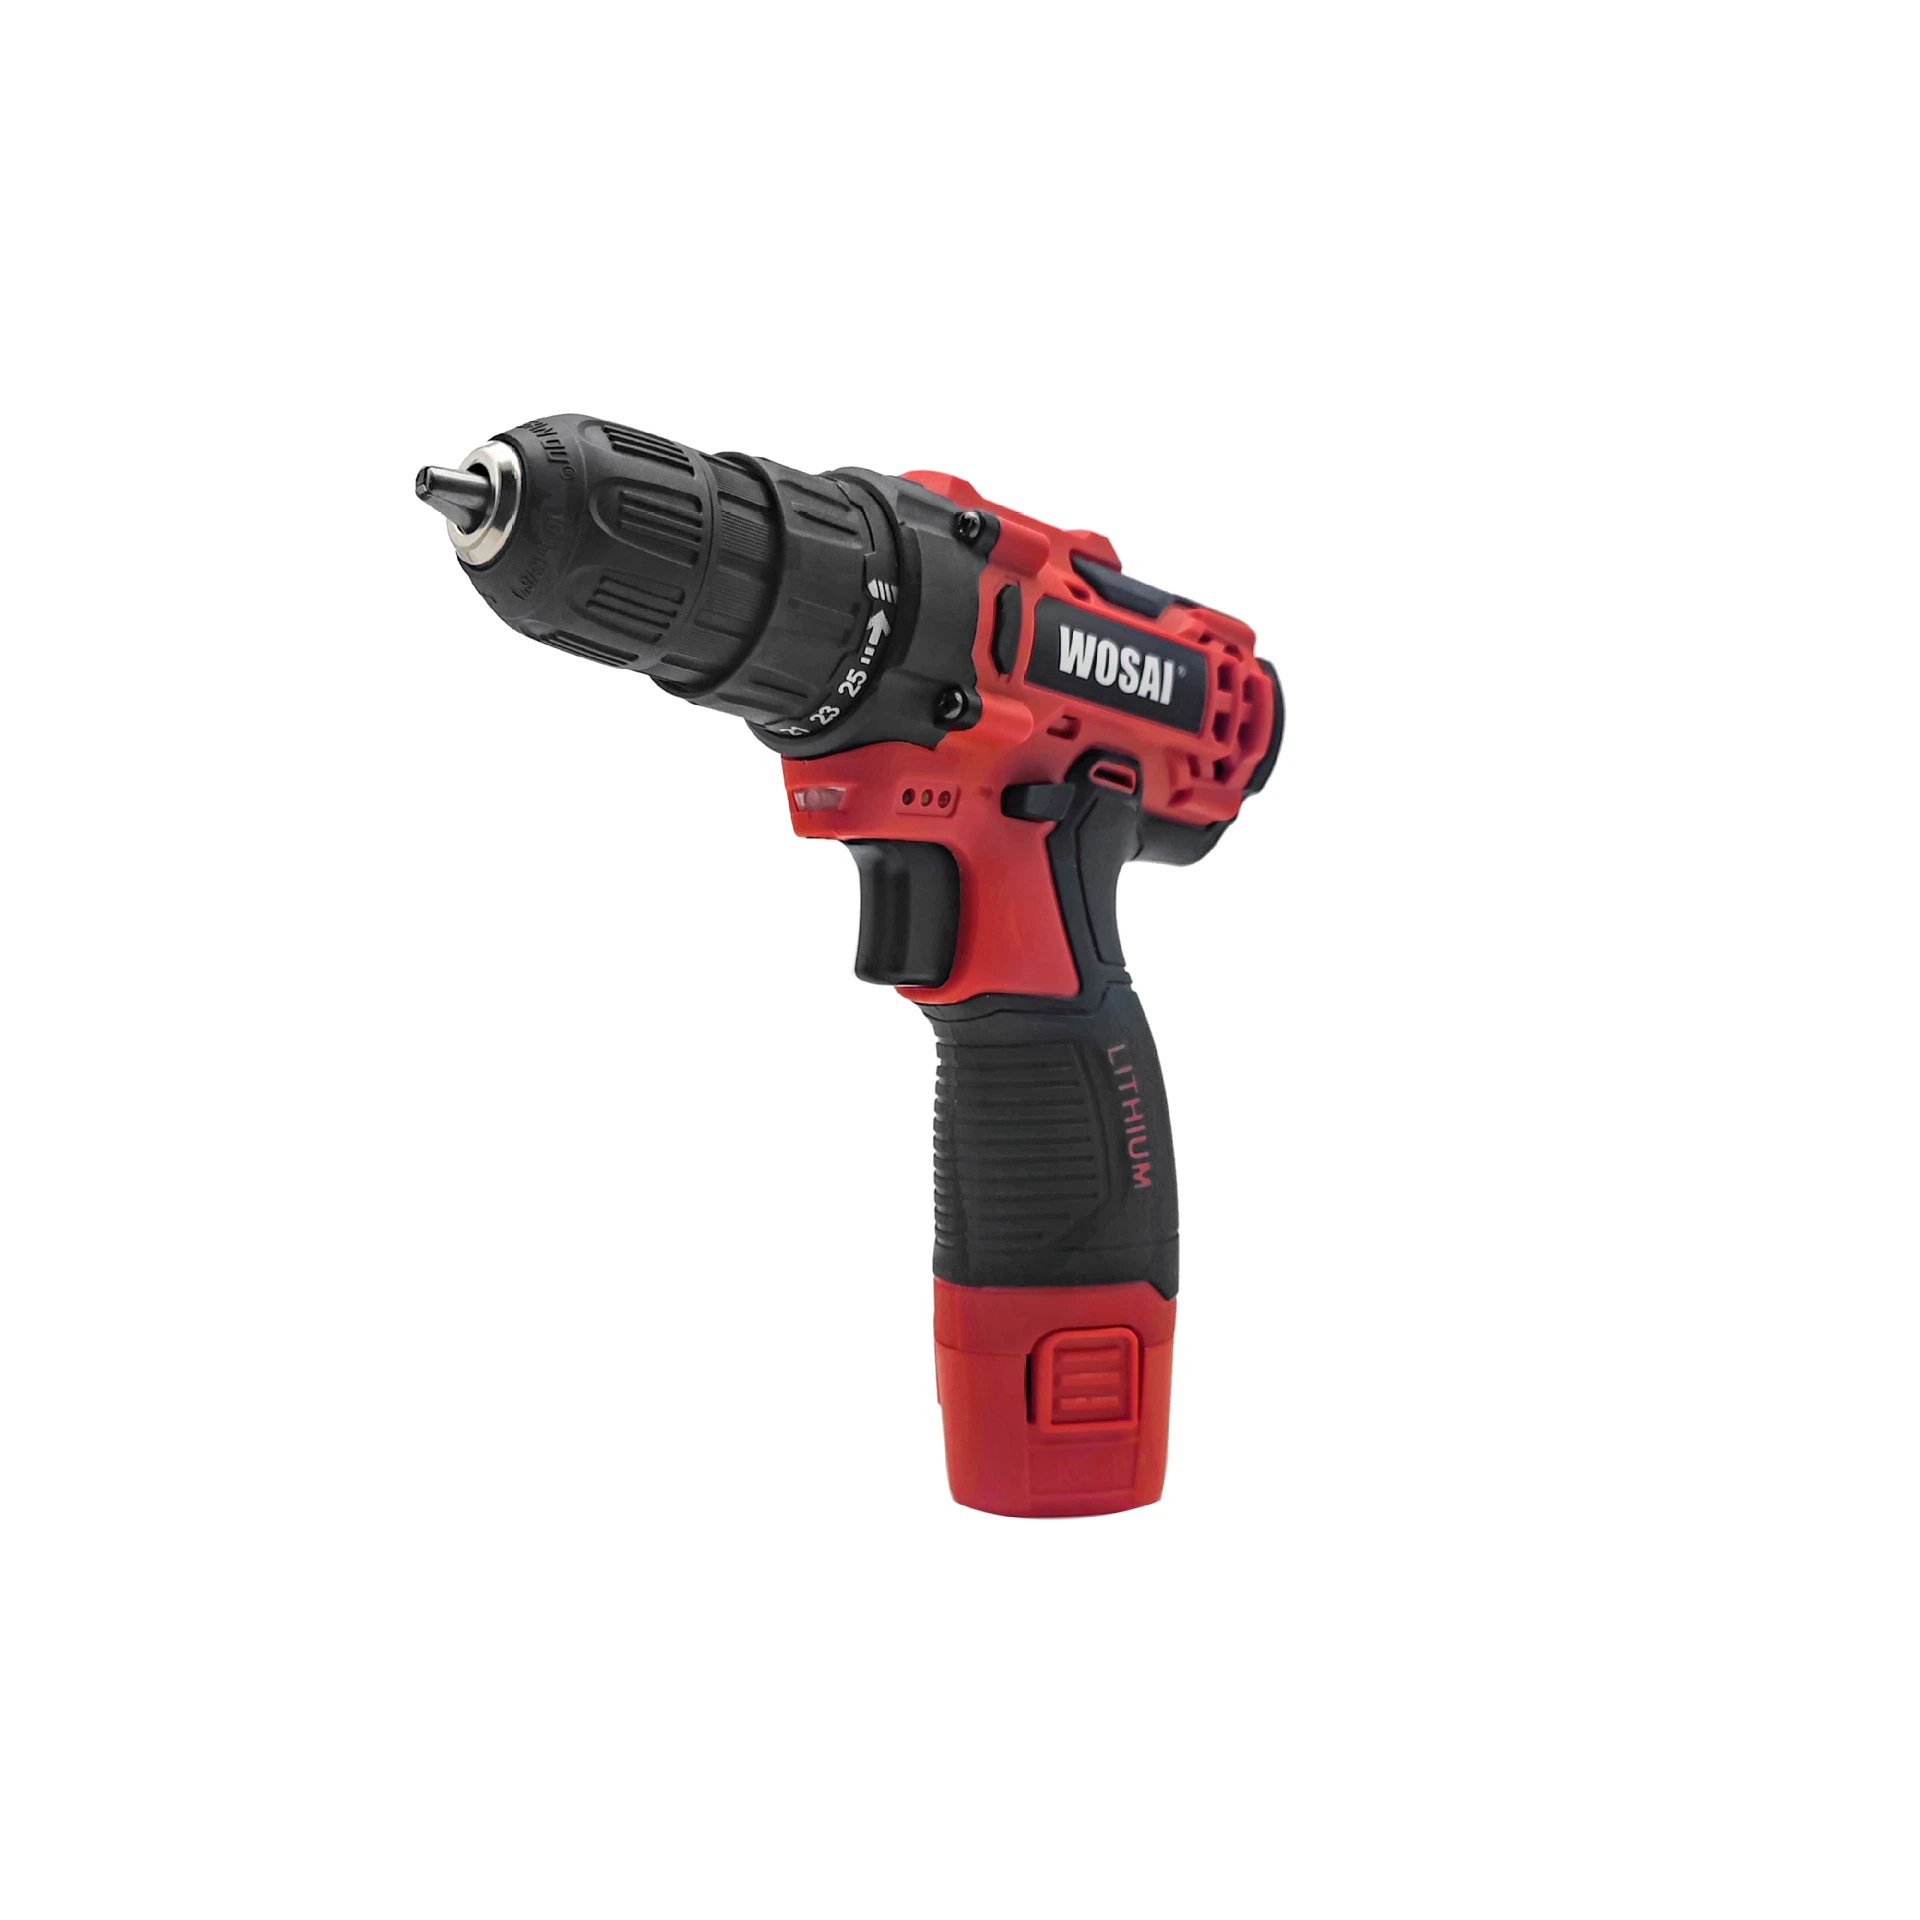 12V Teh-Electrics Drill Combined Wireless Electric Screw Electric Cordless Drill